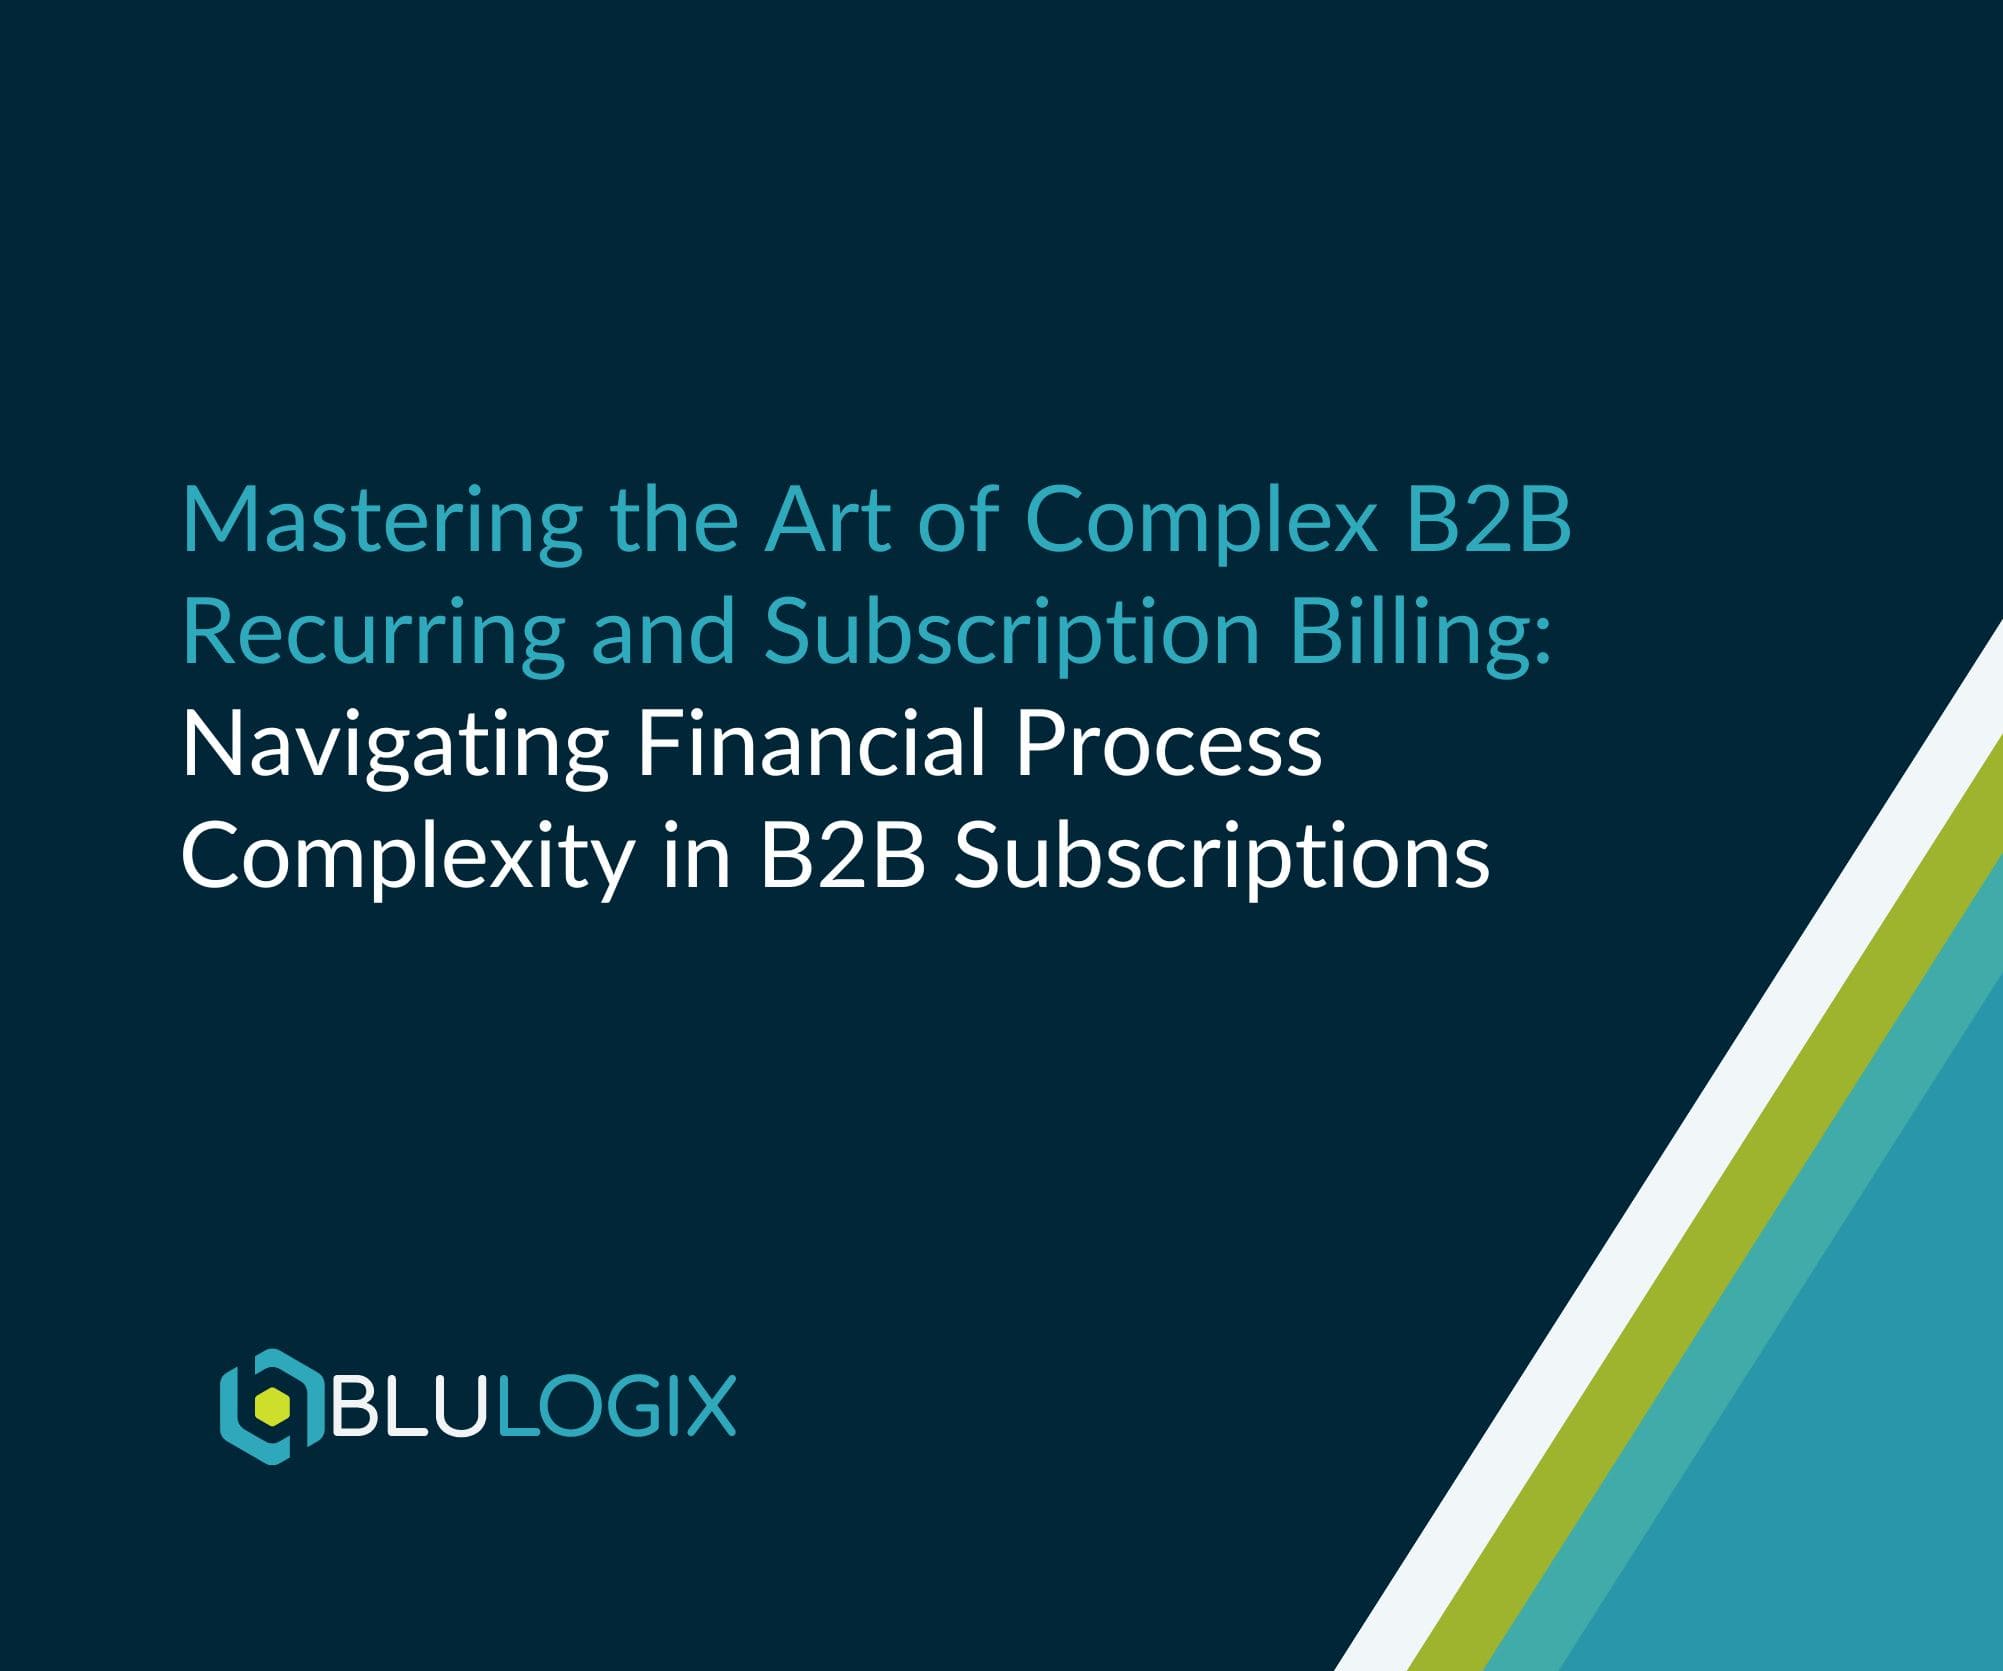 Navigating Financial Process Complexity in B2B Subscriptions